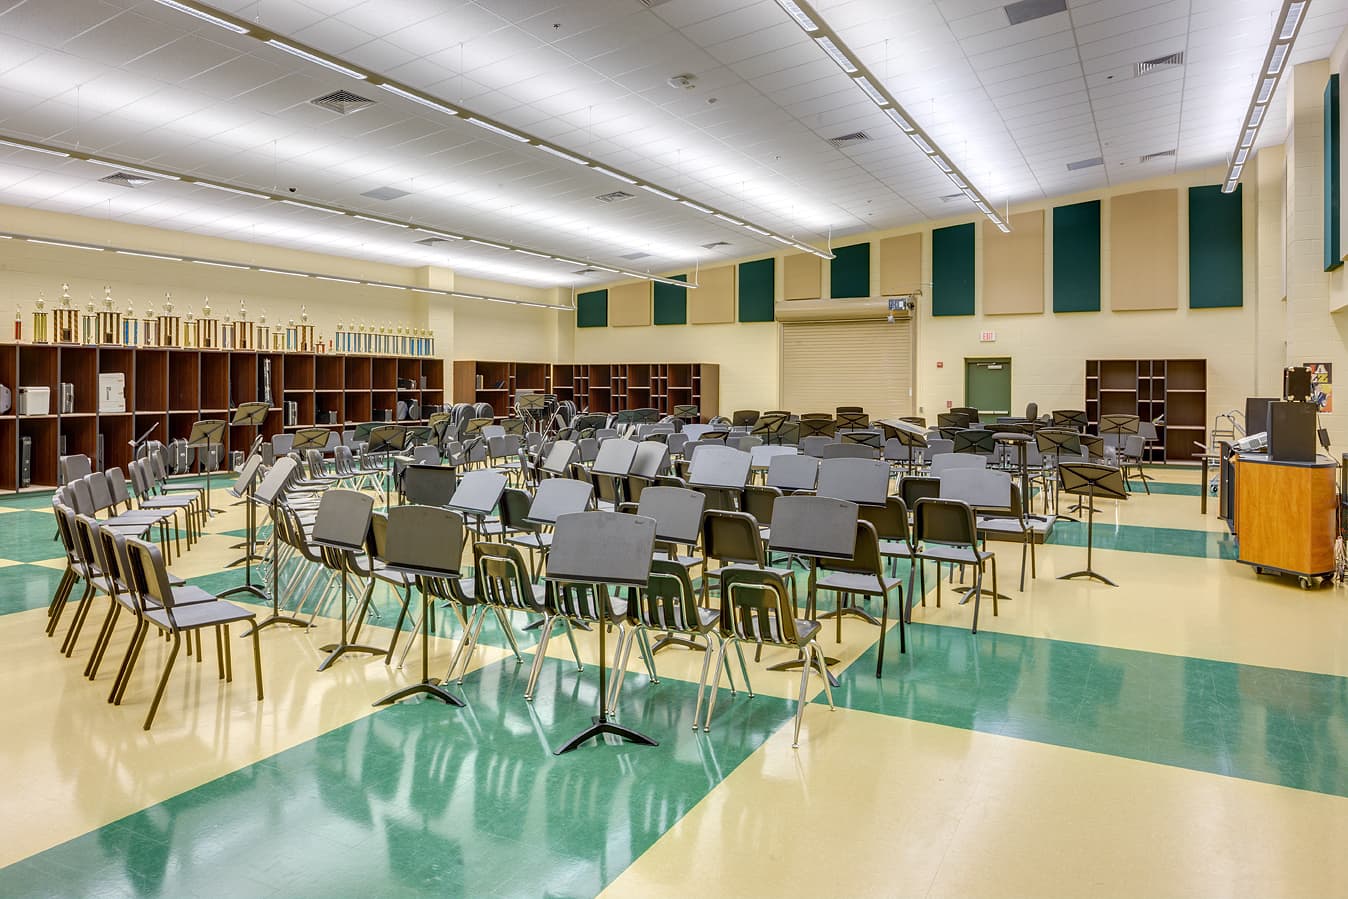 Chaffin JHS Band Room